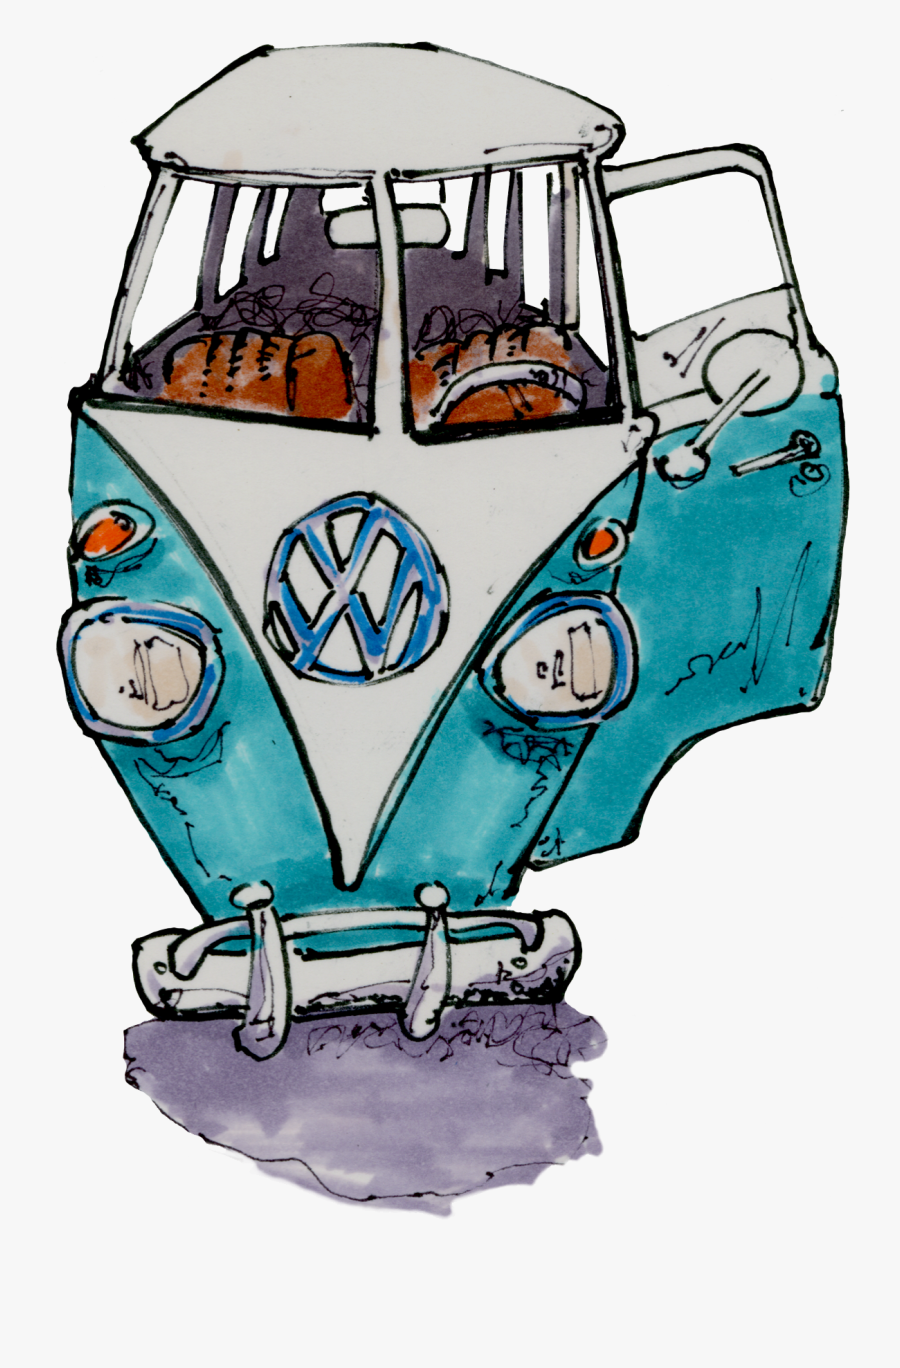 Series Of Vw Bus Sketches, Transparent Clipart